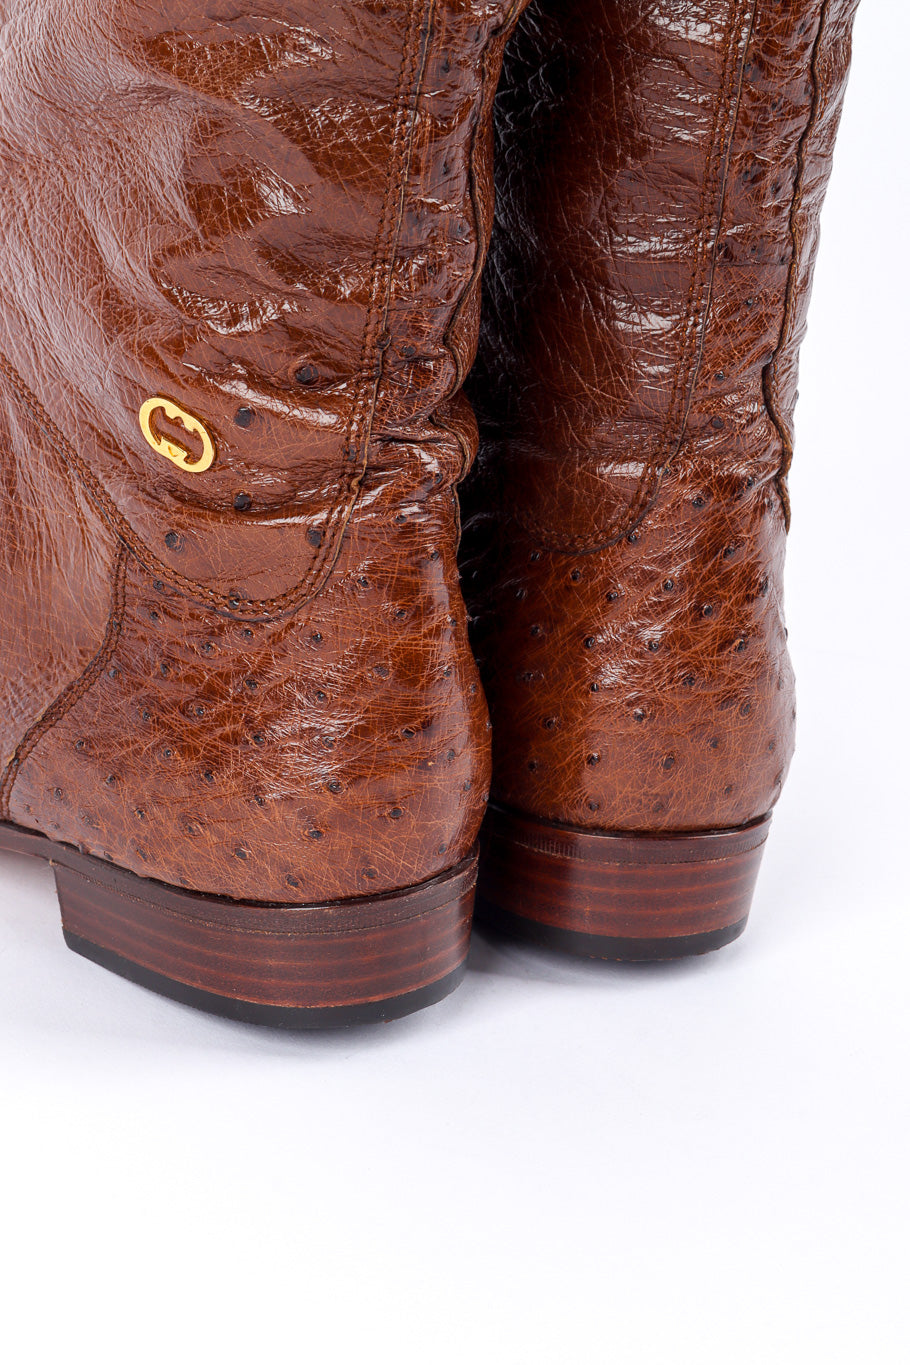 Vintage Gucci Brown Ostrich Leather Riding Boot back heel closeup @recessla